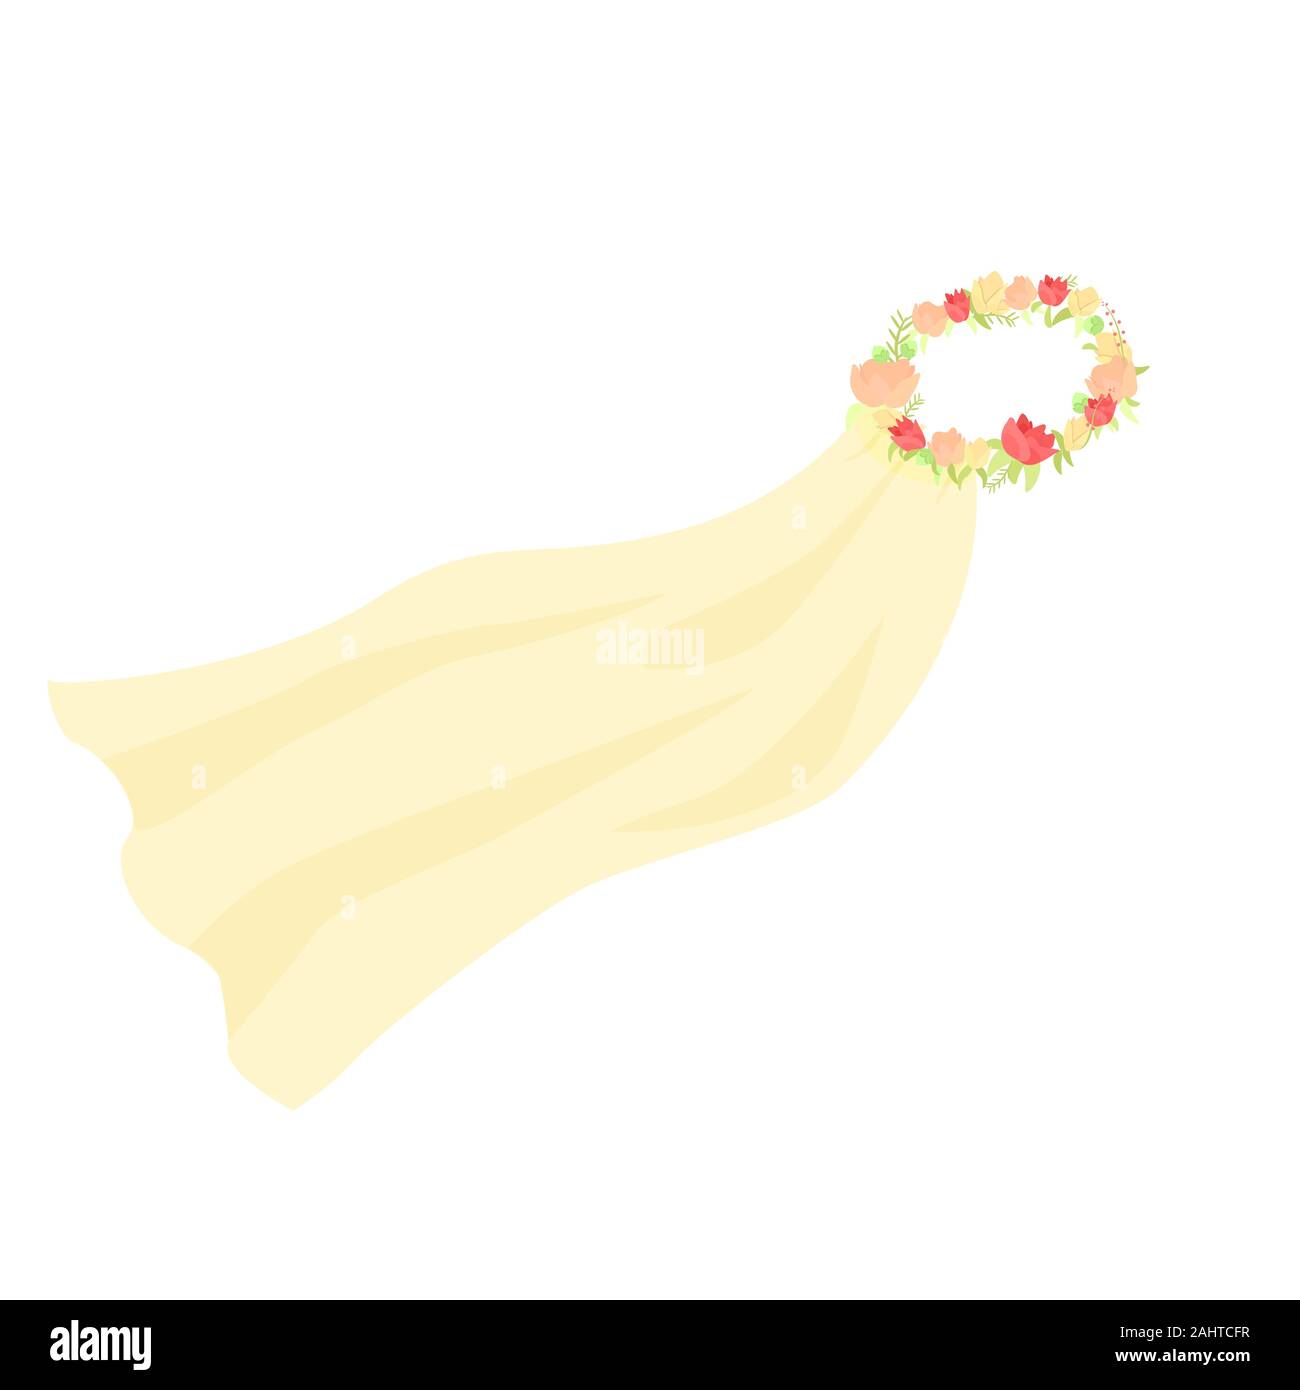 Modern First Communion Veil with Attached Tiara  First Communion Veils and  Tiaras for Sale -Shop First Communion Dresses